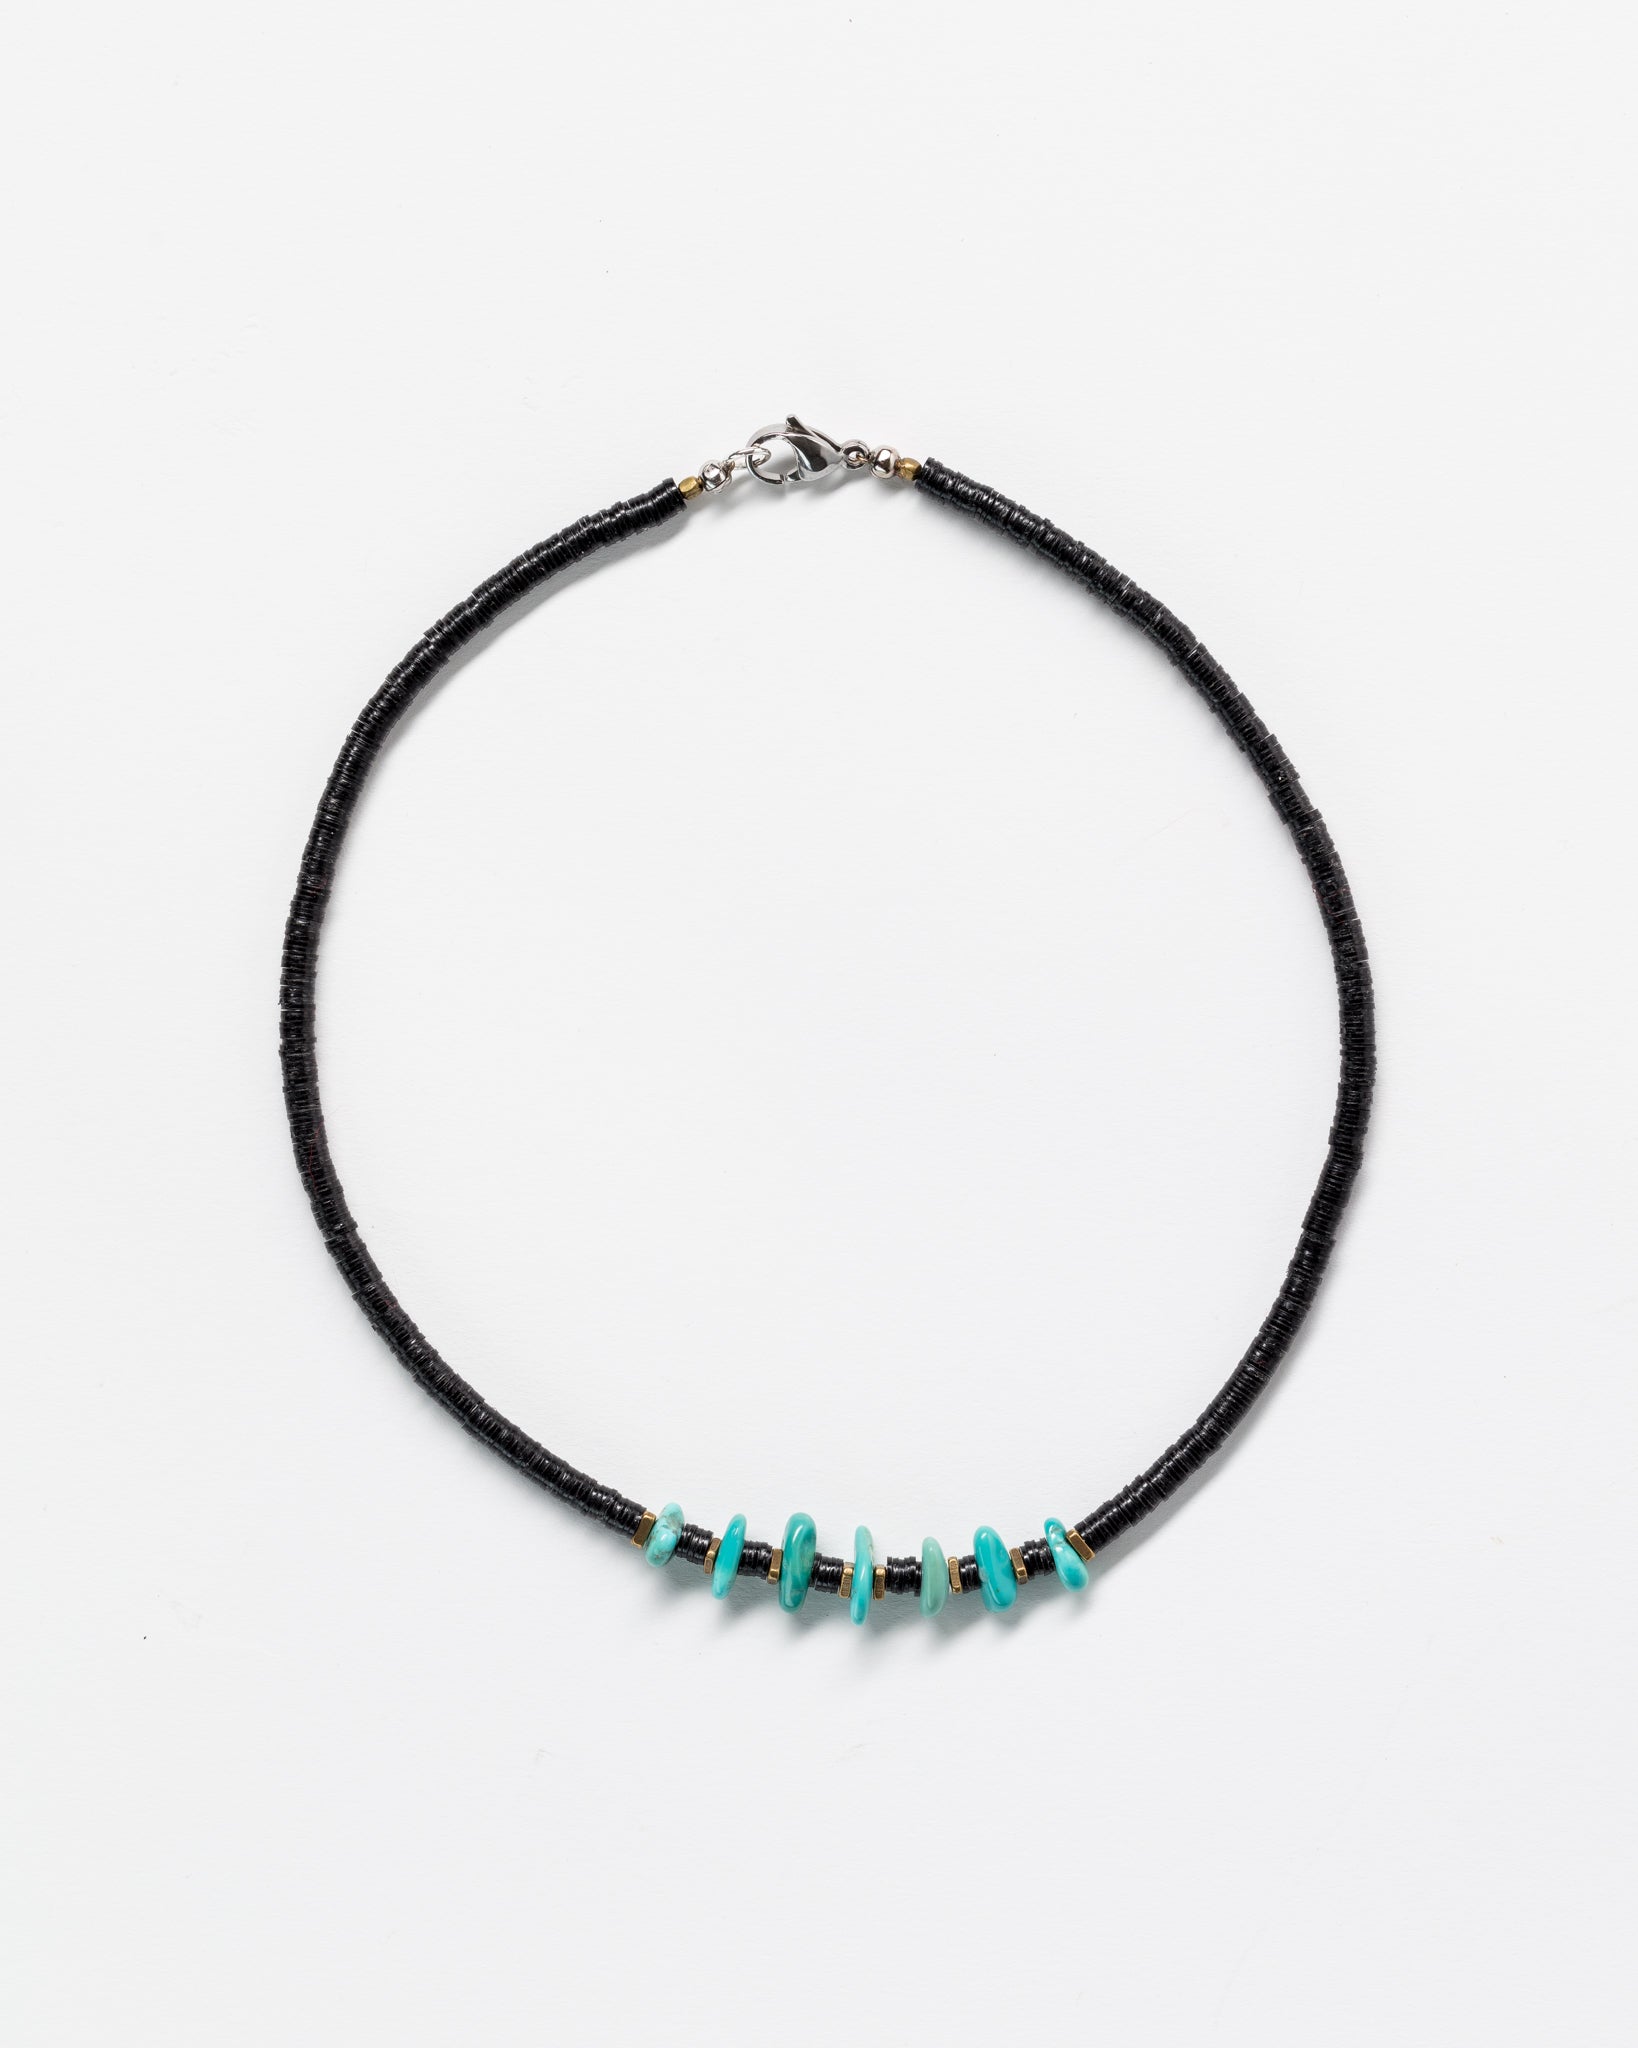 Designs By Raya multi color necklace with Arizona turquoise gemstone accents centered on the strand, against a white background.